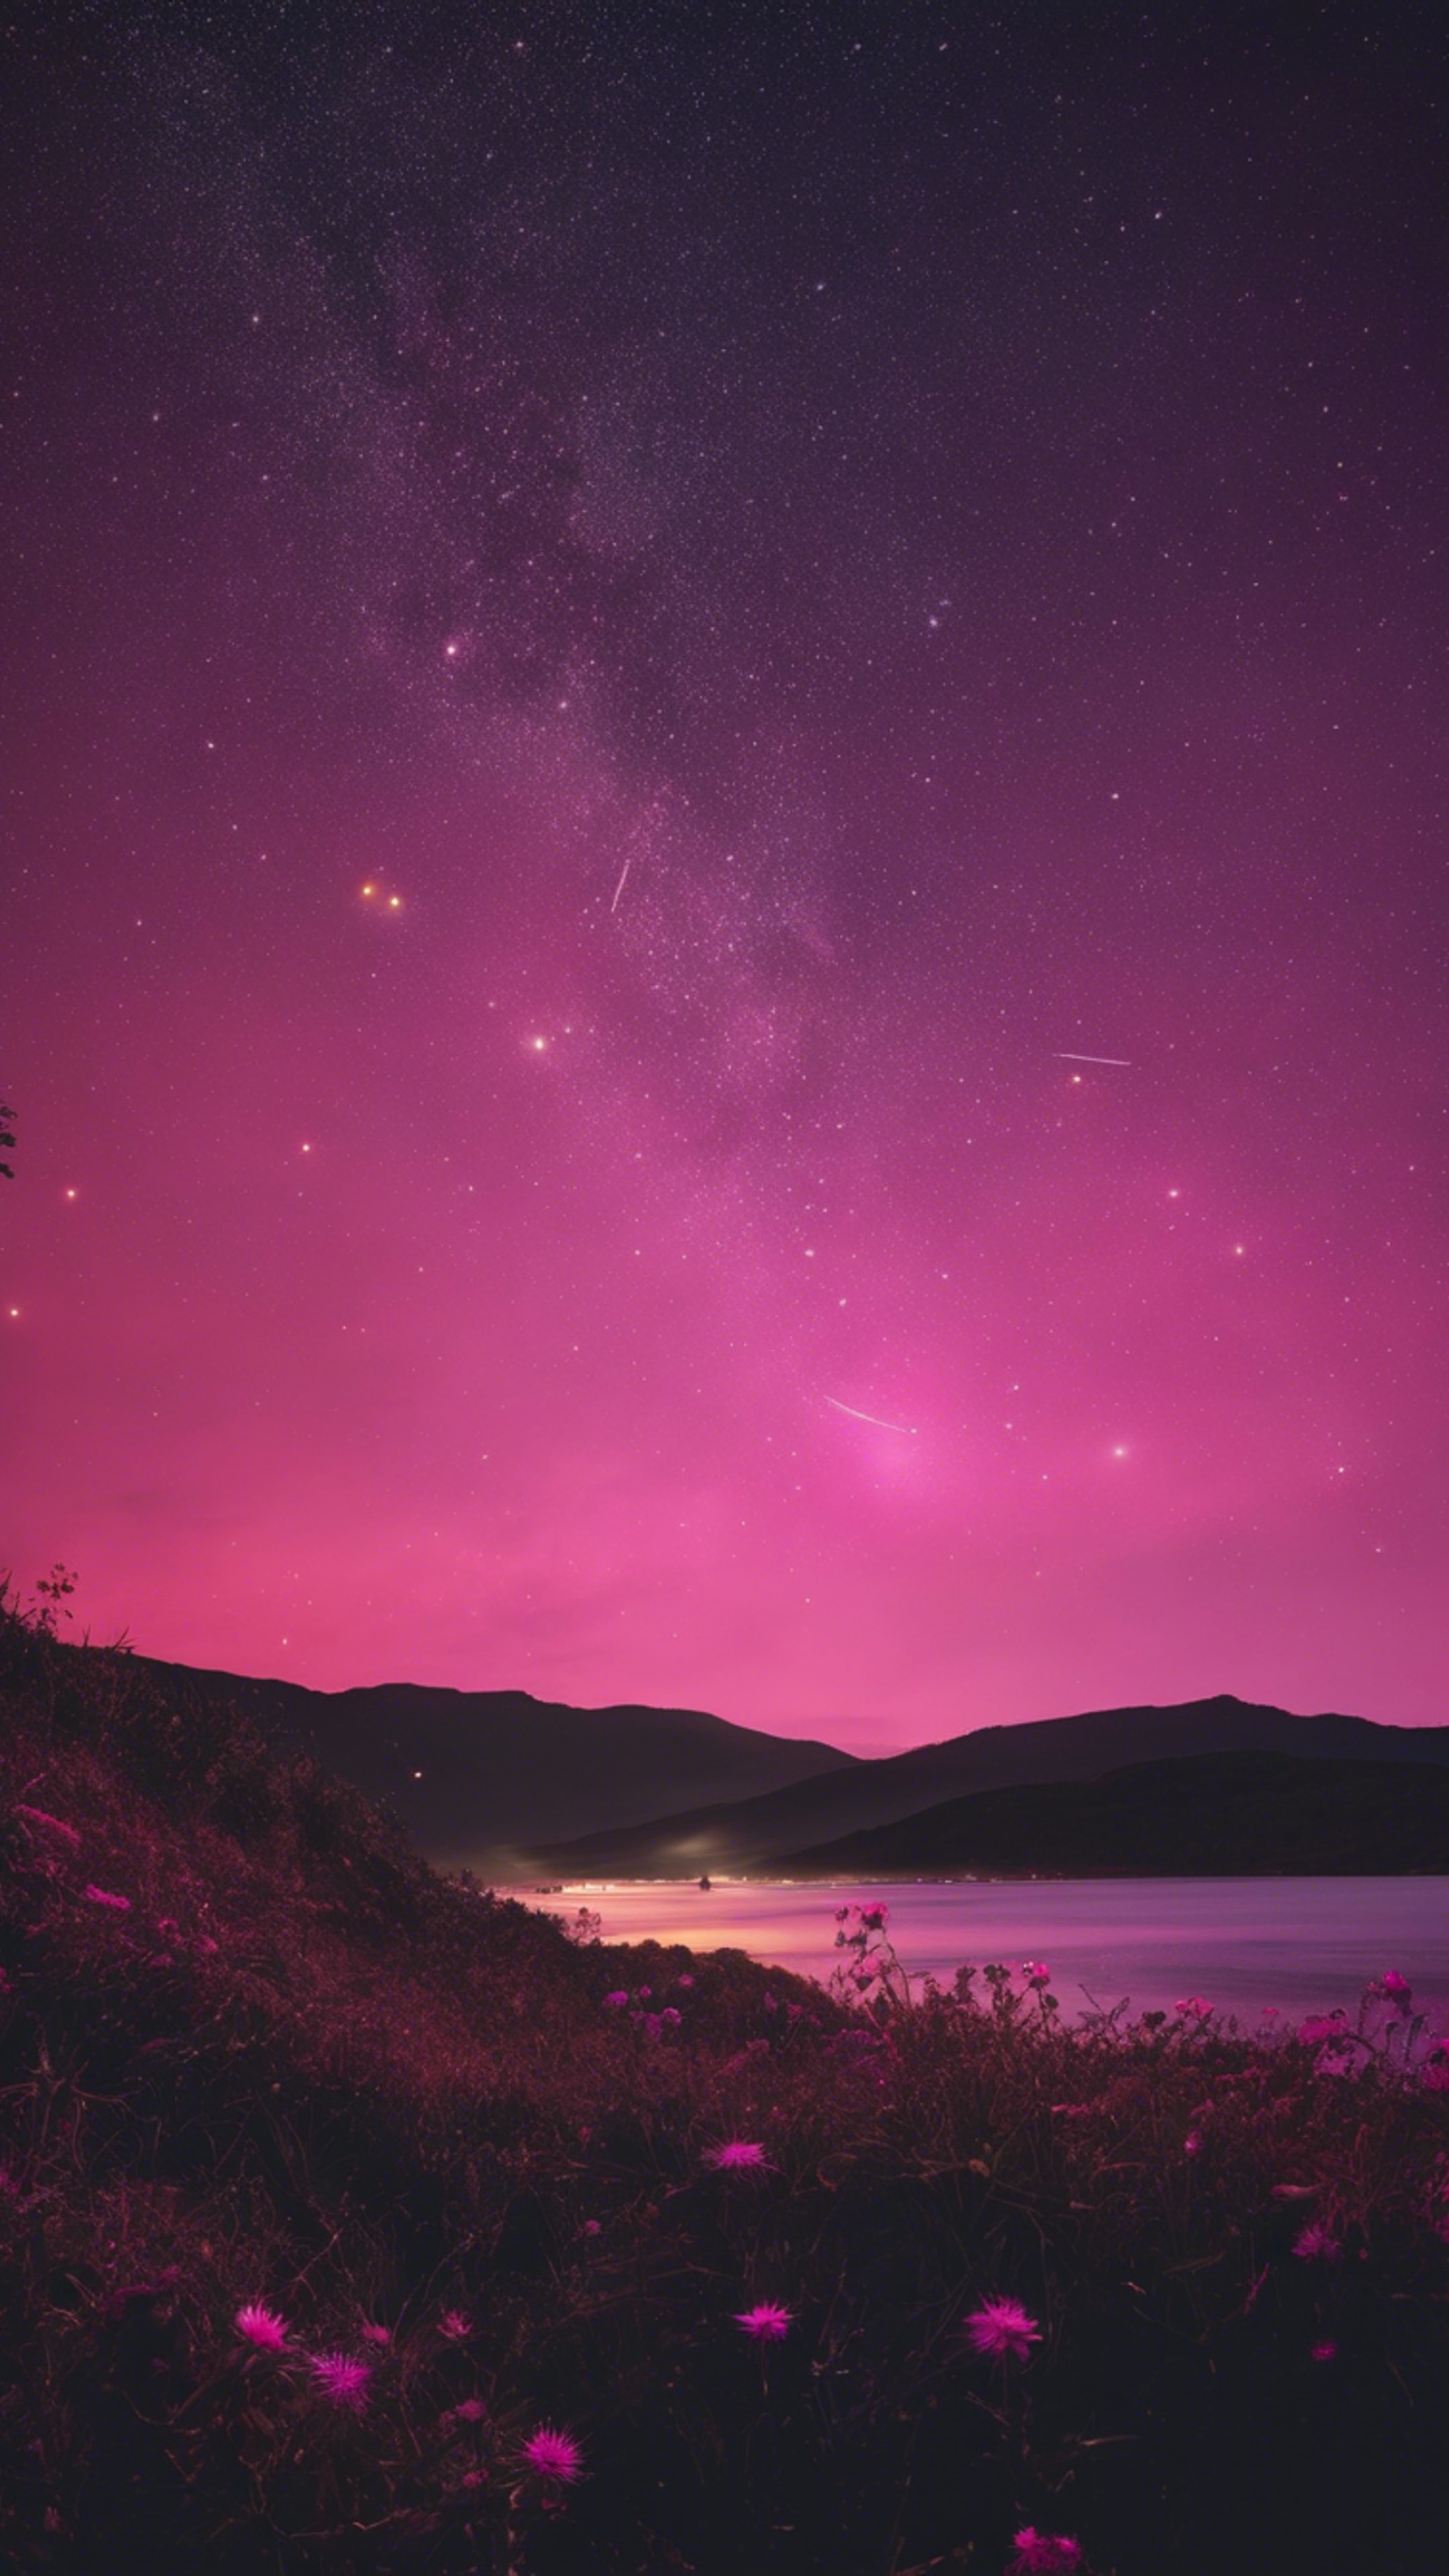 A shooting star glowing in a vibrant pink as it crosses the dark night sky.壁紙[c8fce7a9134e4e29a83b]